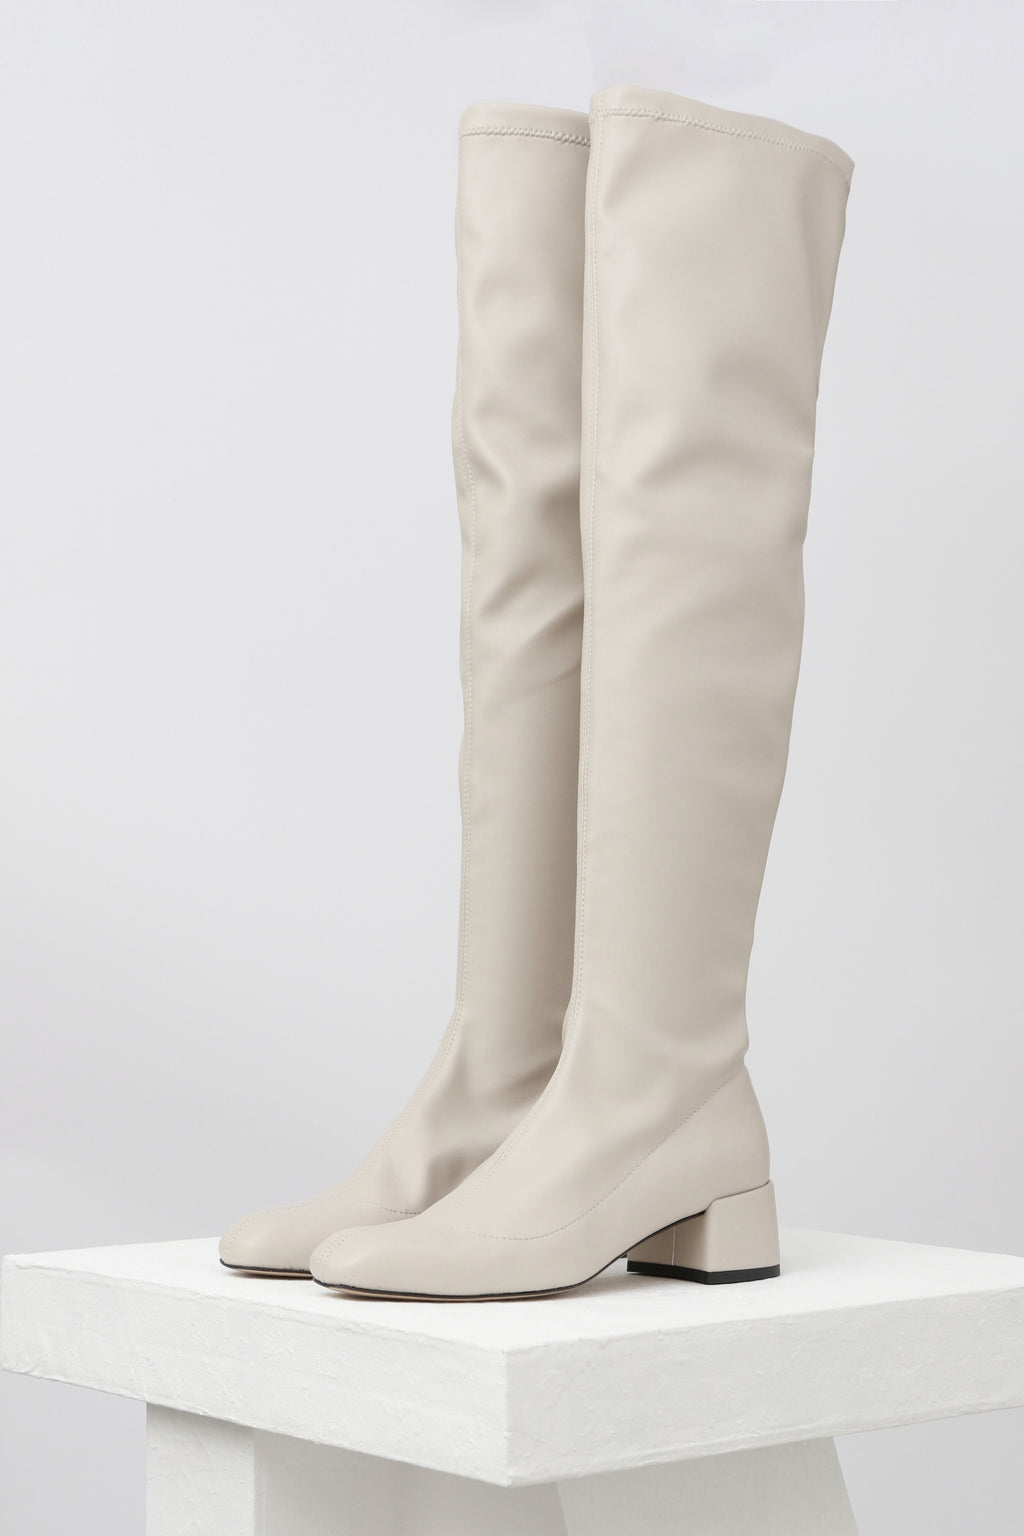 Malversar Grave Paternal MONCLOA - Off-White Faux Stretch-Leather Thigh-High Boots – Souliers  Martinez